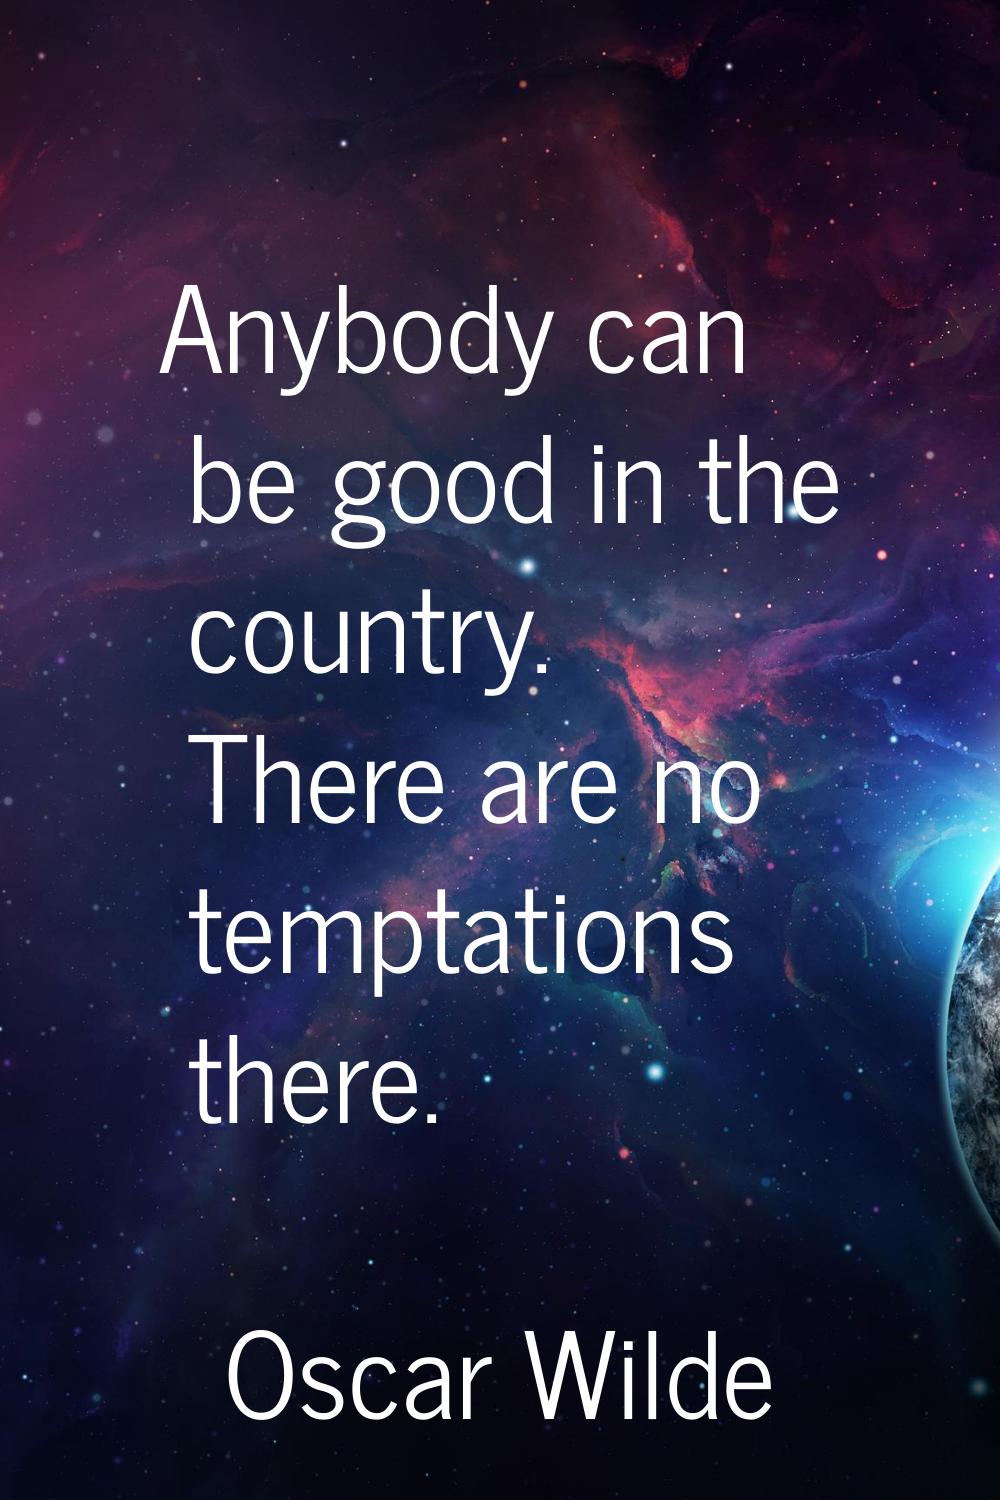 Anybody can be good in the country. There are no temptations there.